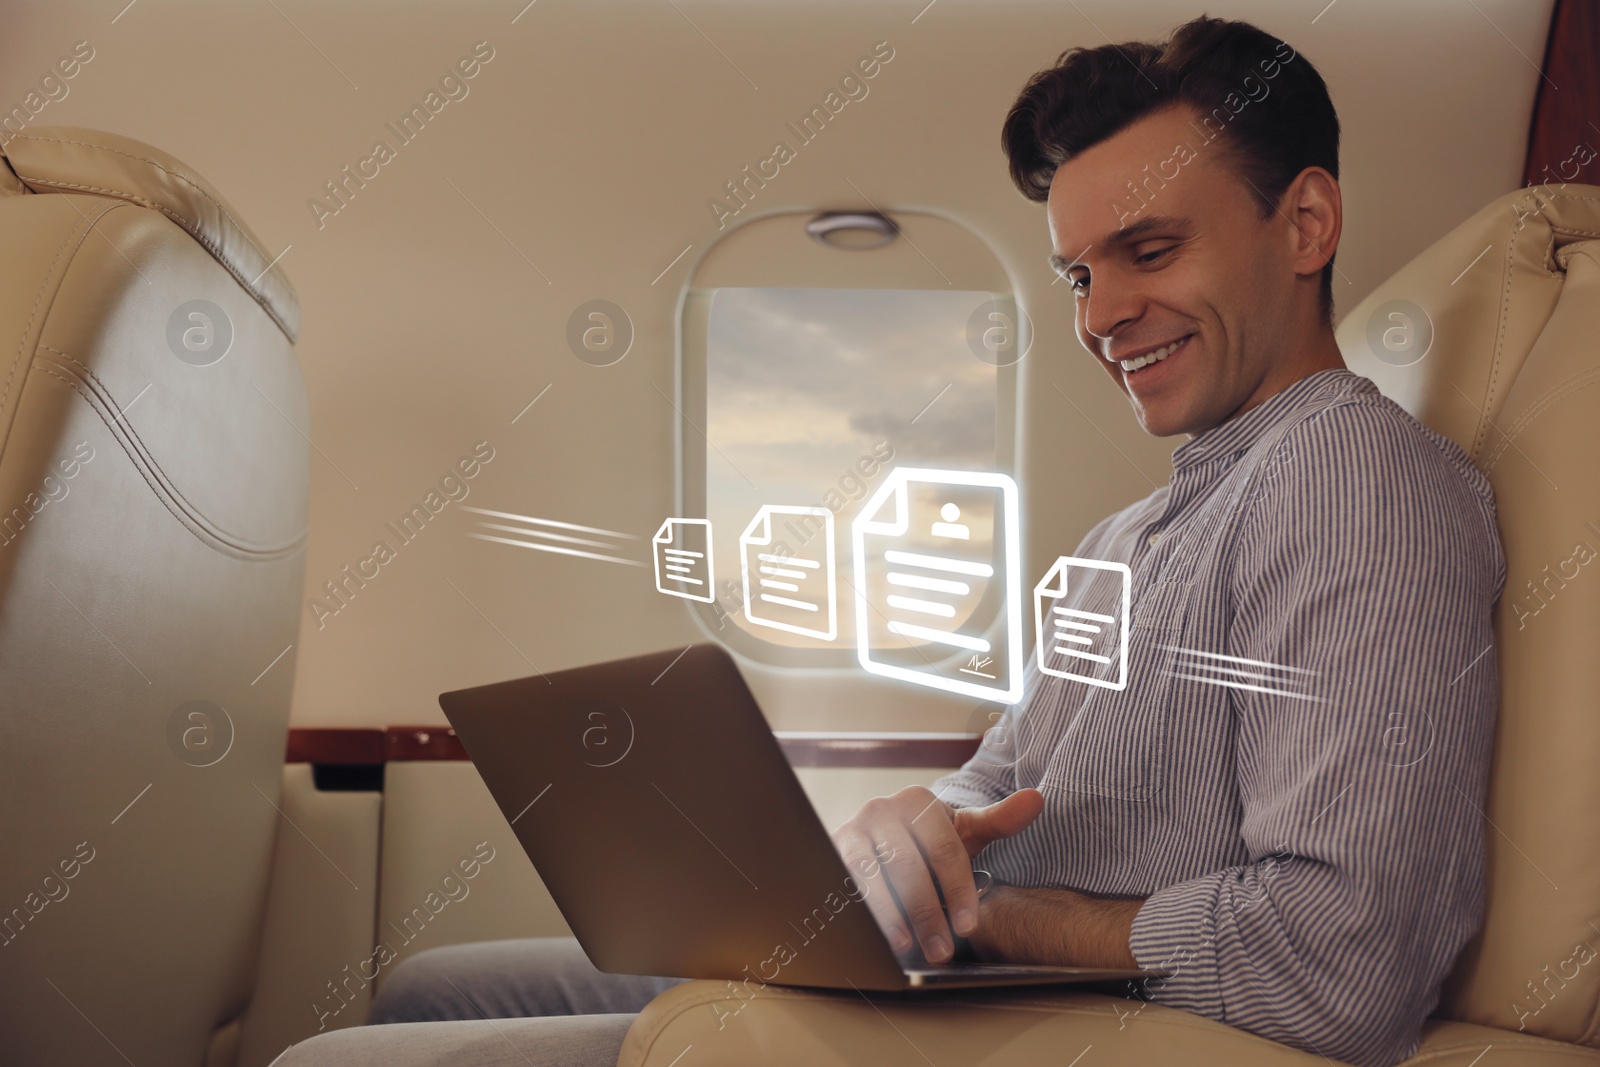 Image of Concept of electronic signature. Man using laptop in airplane during flight